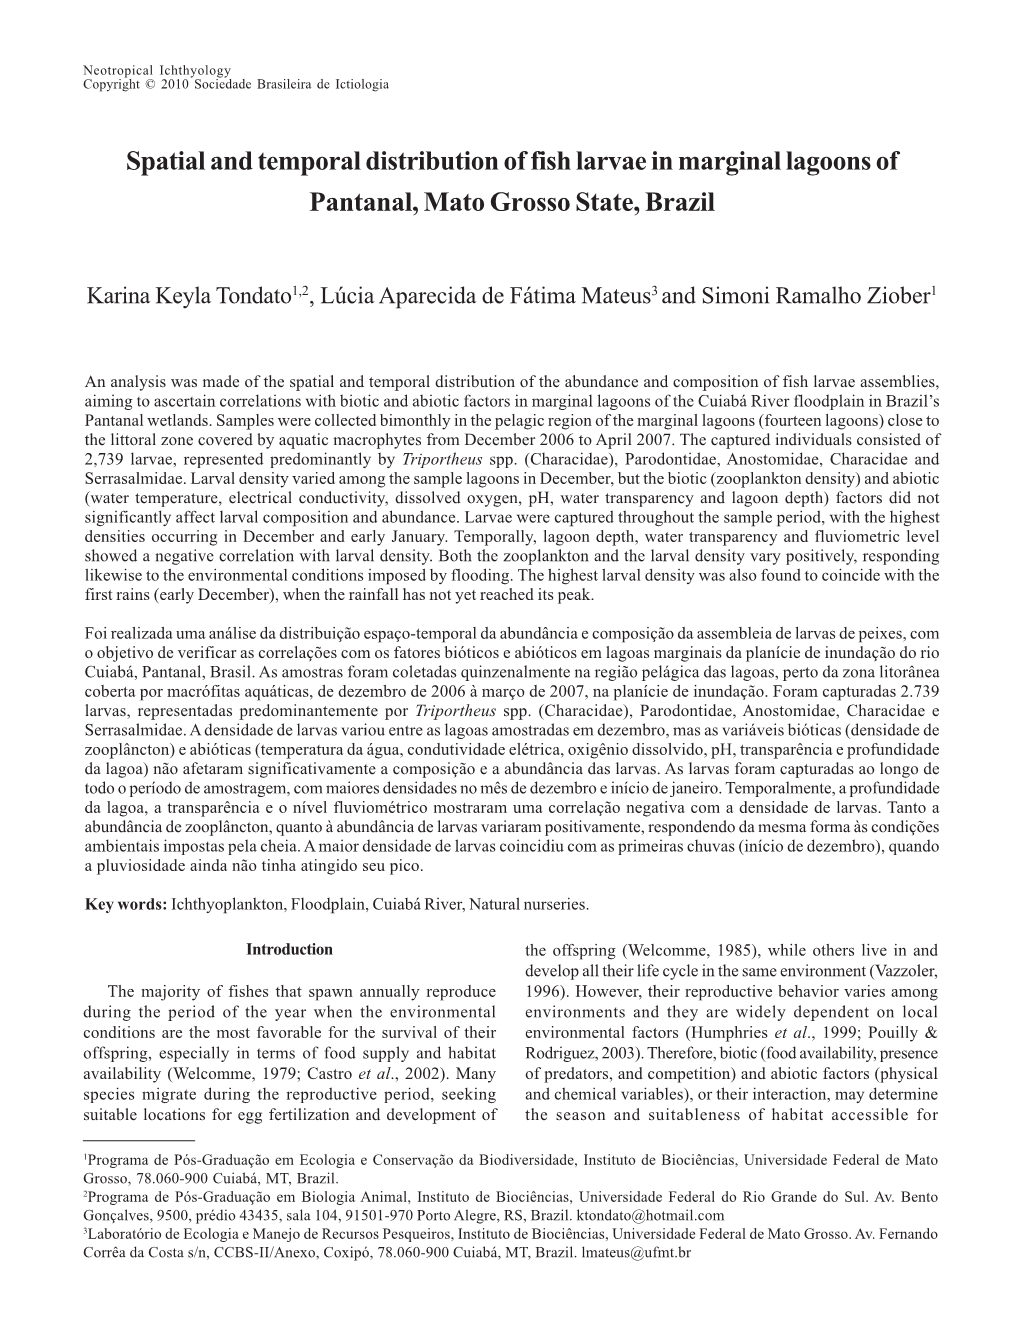 Spatial and Temporal Distribution of Fish Larvae in Marginal Lagoons of Pantanal, Mato Grosso State, Brazil